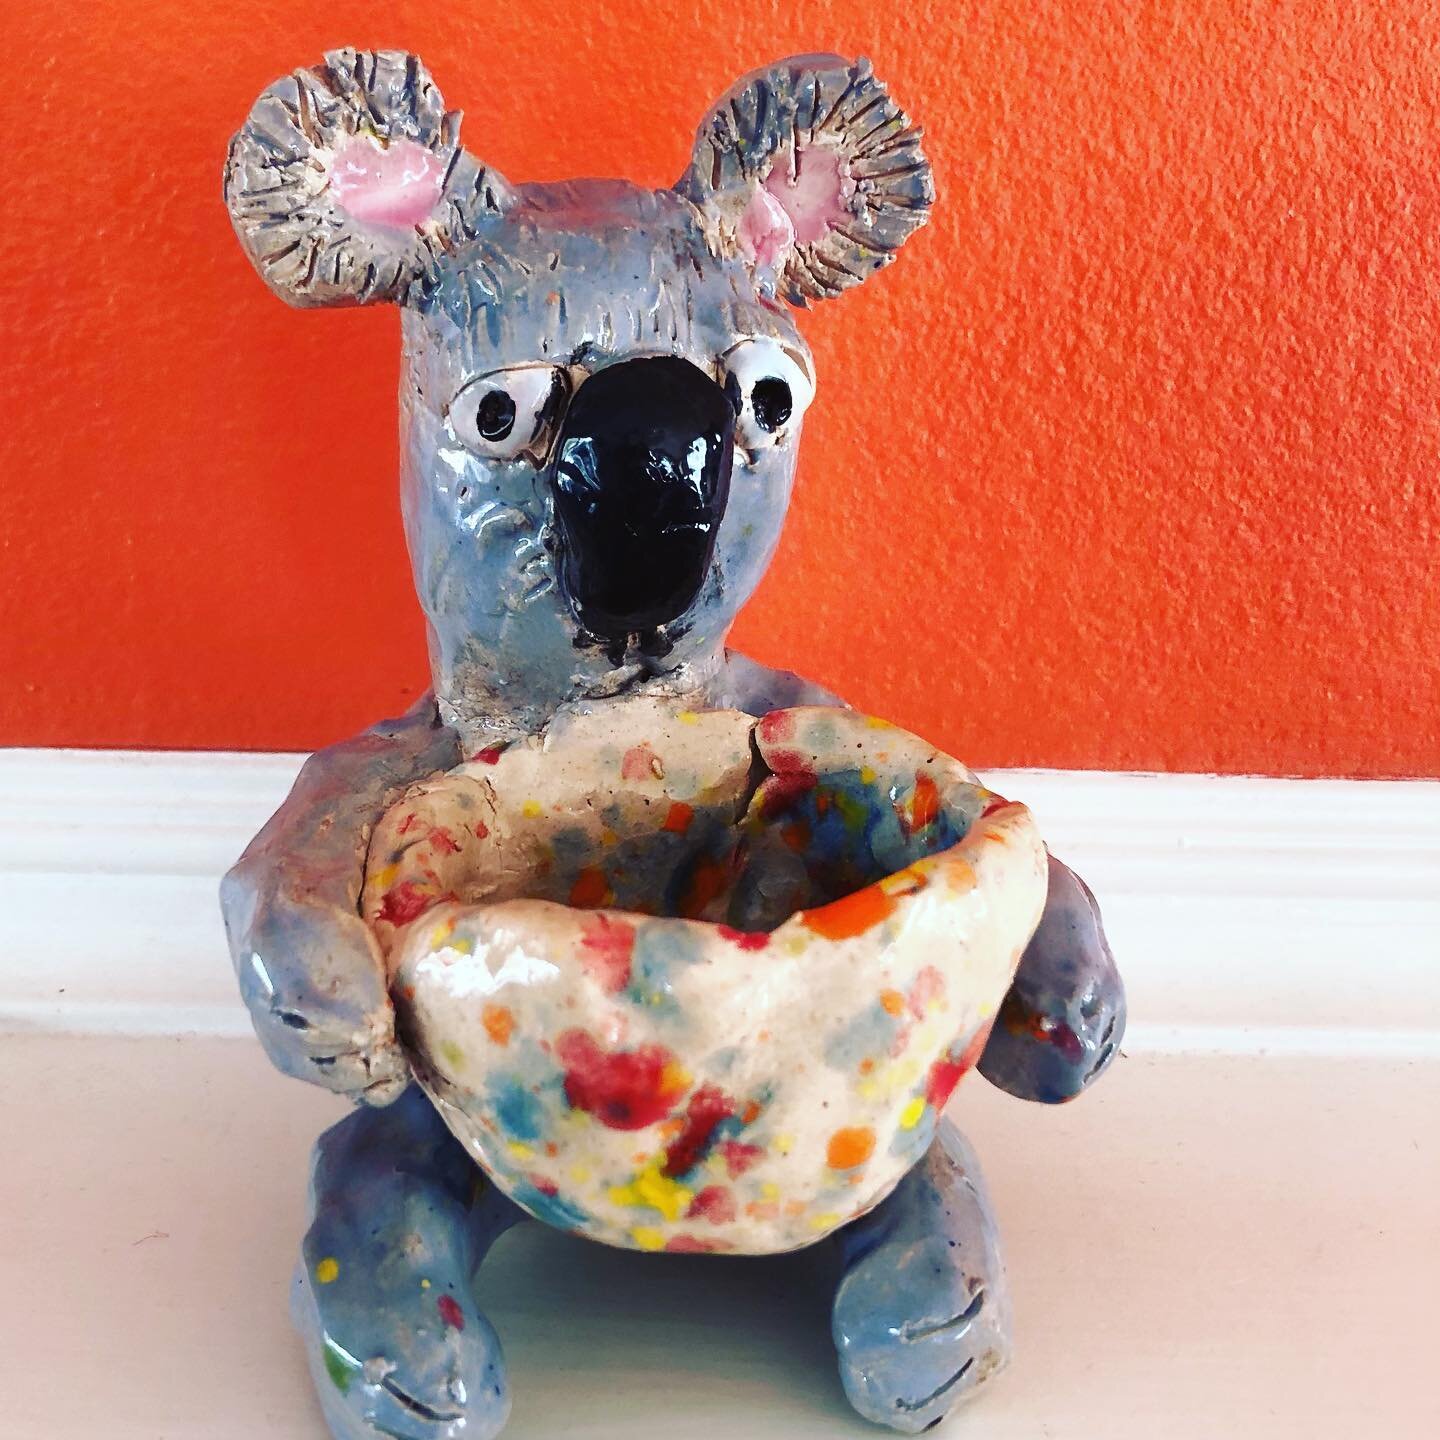 No better way to start your day than with a ceramic Koala made by my daughter. #koala